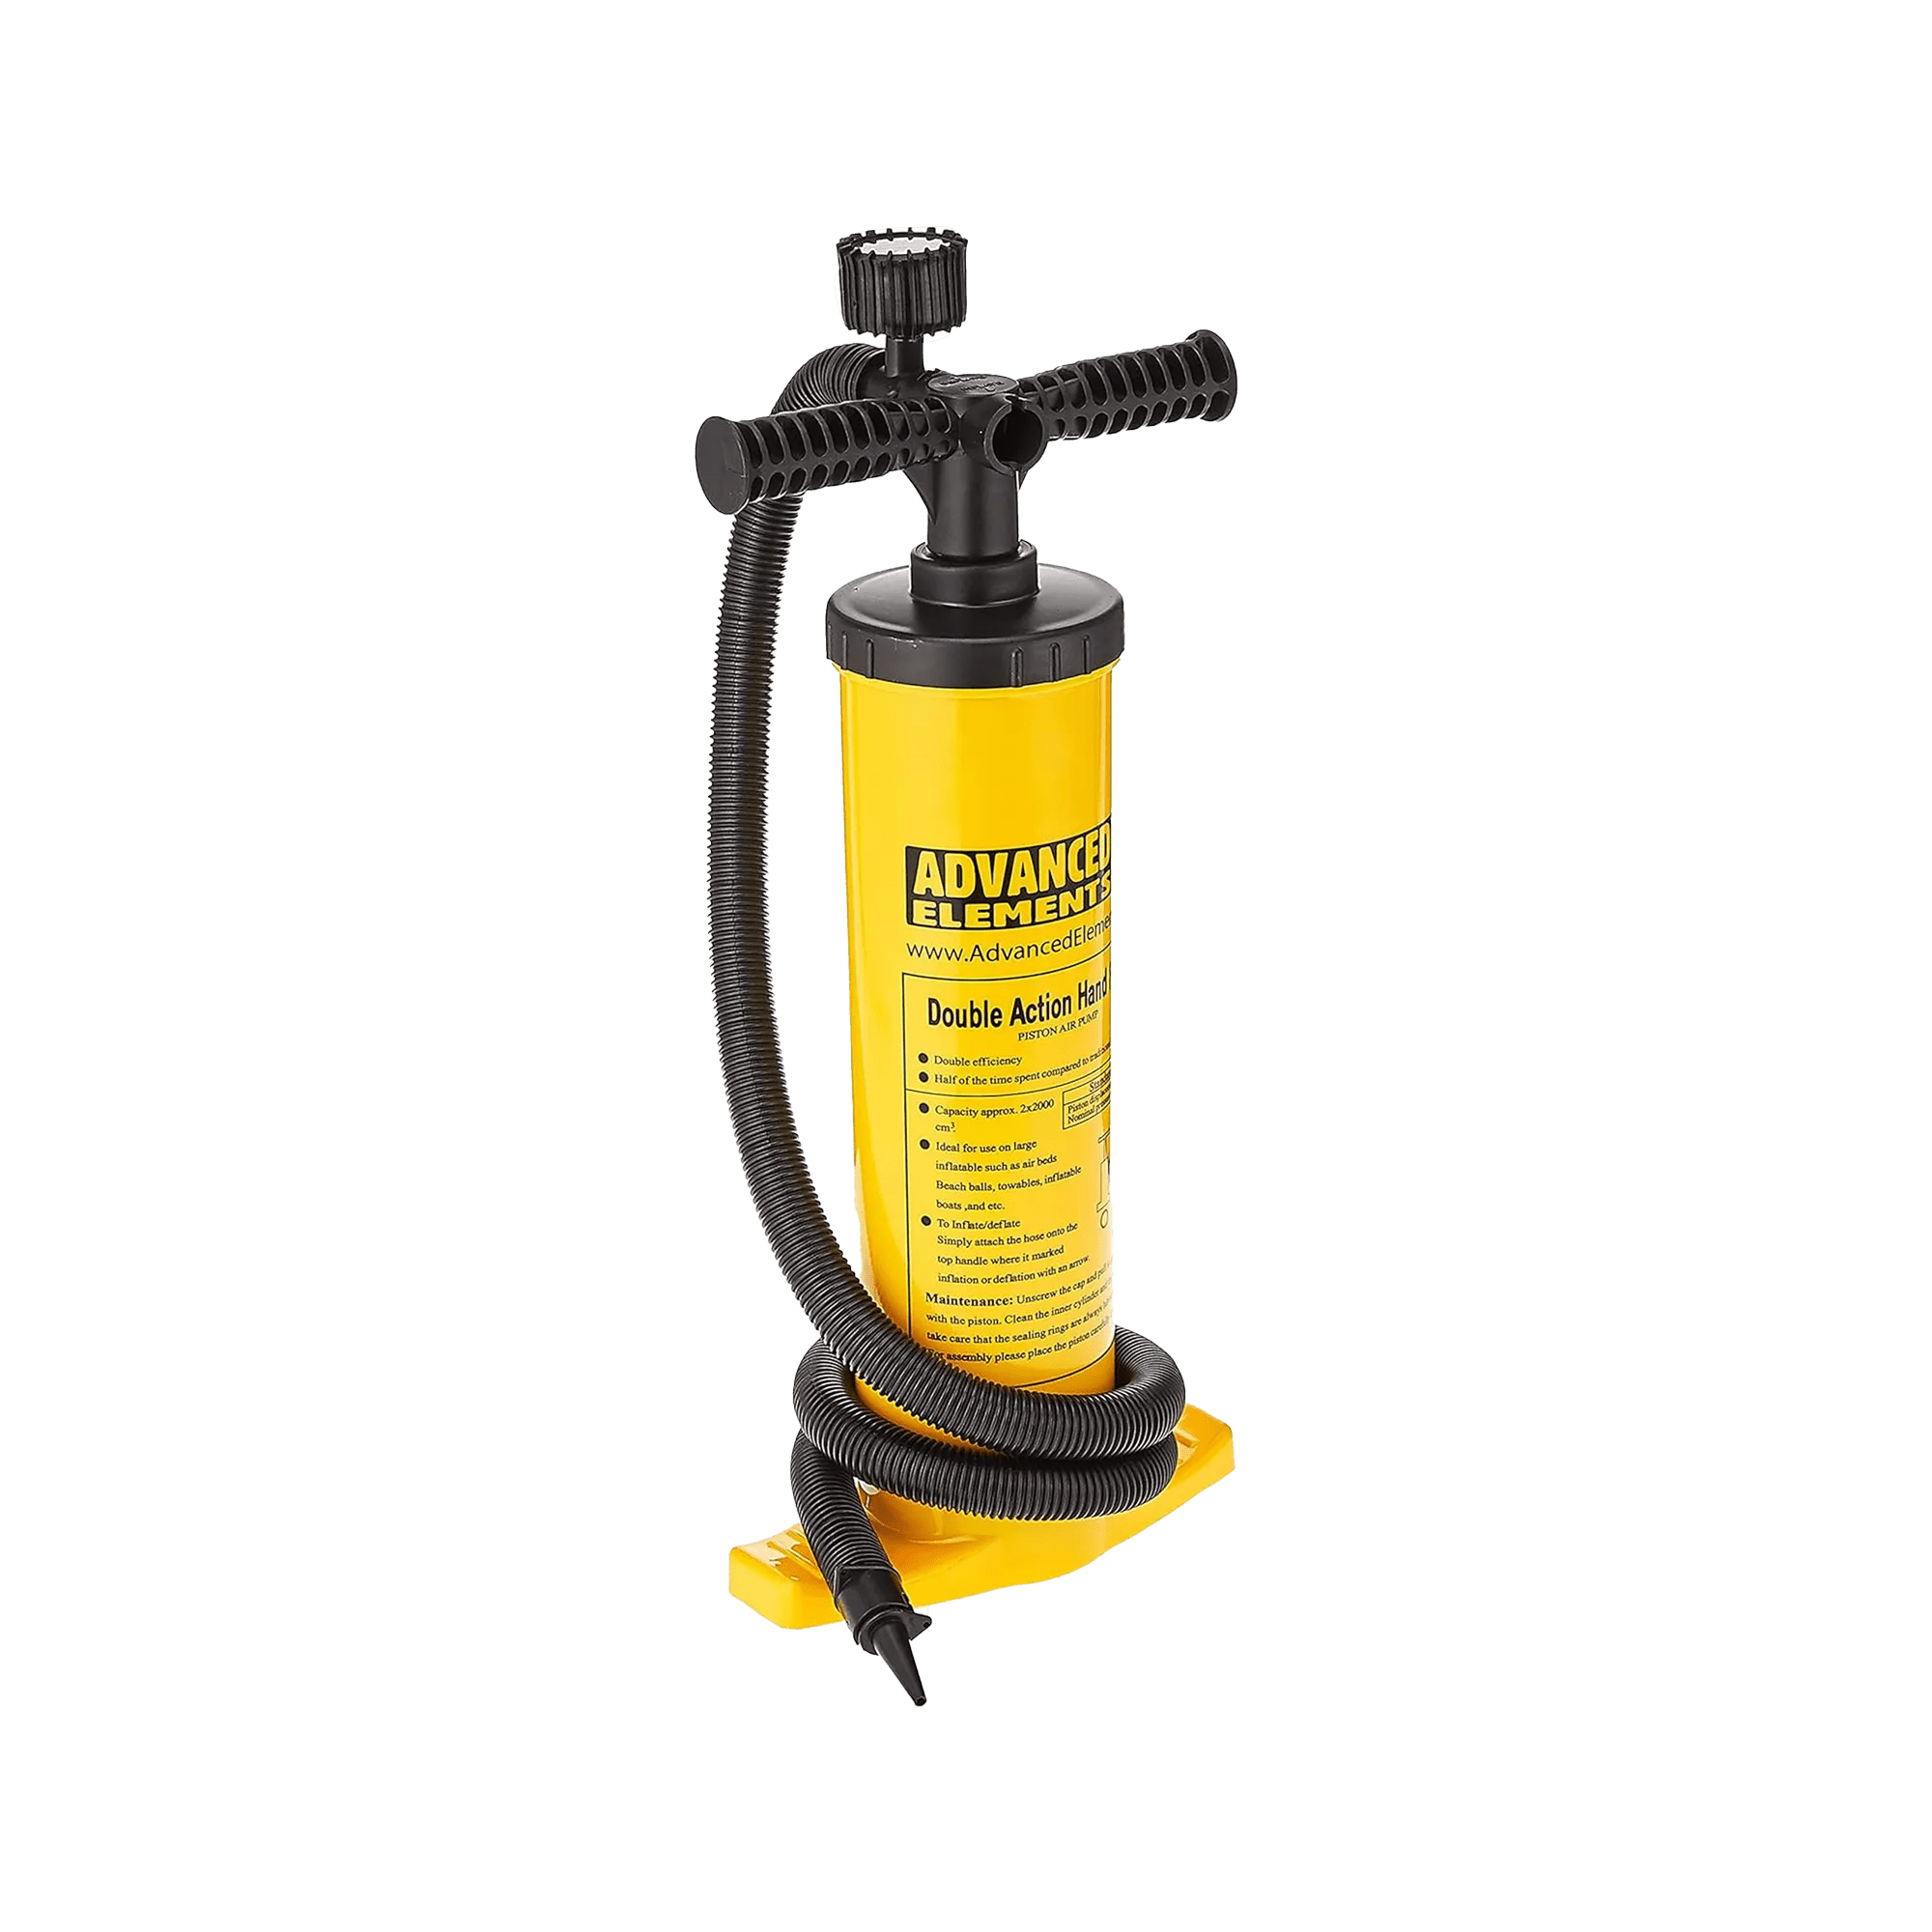 ADVANCED ELEMENTS - Double-Action Hand Pump with Pressure Gauge - Black - AE2011 - SIDE